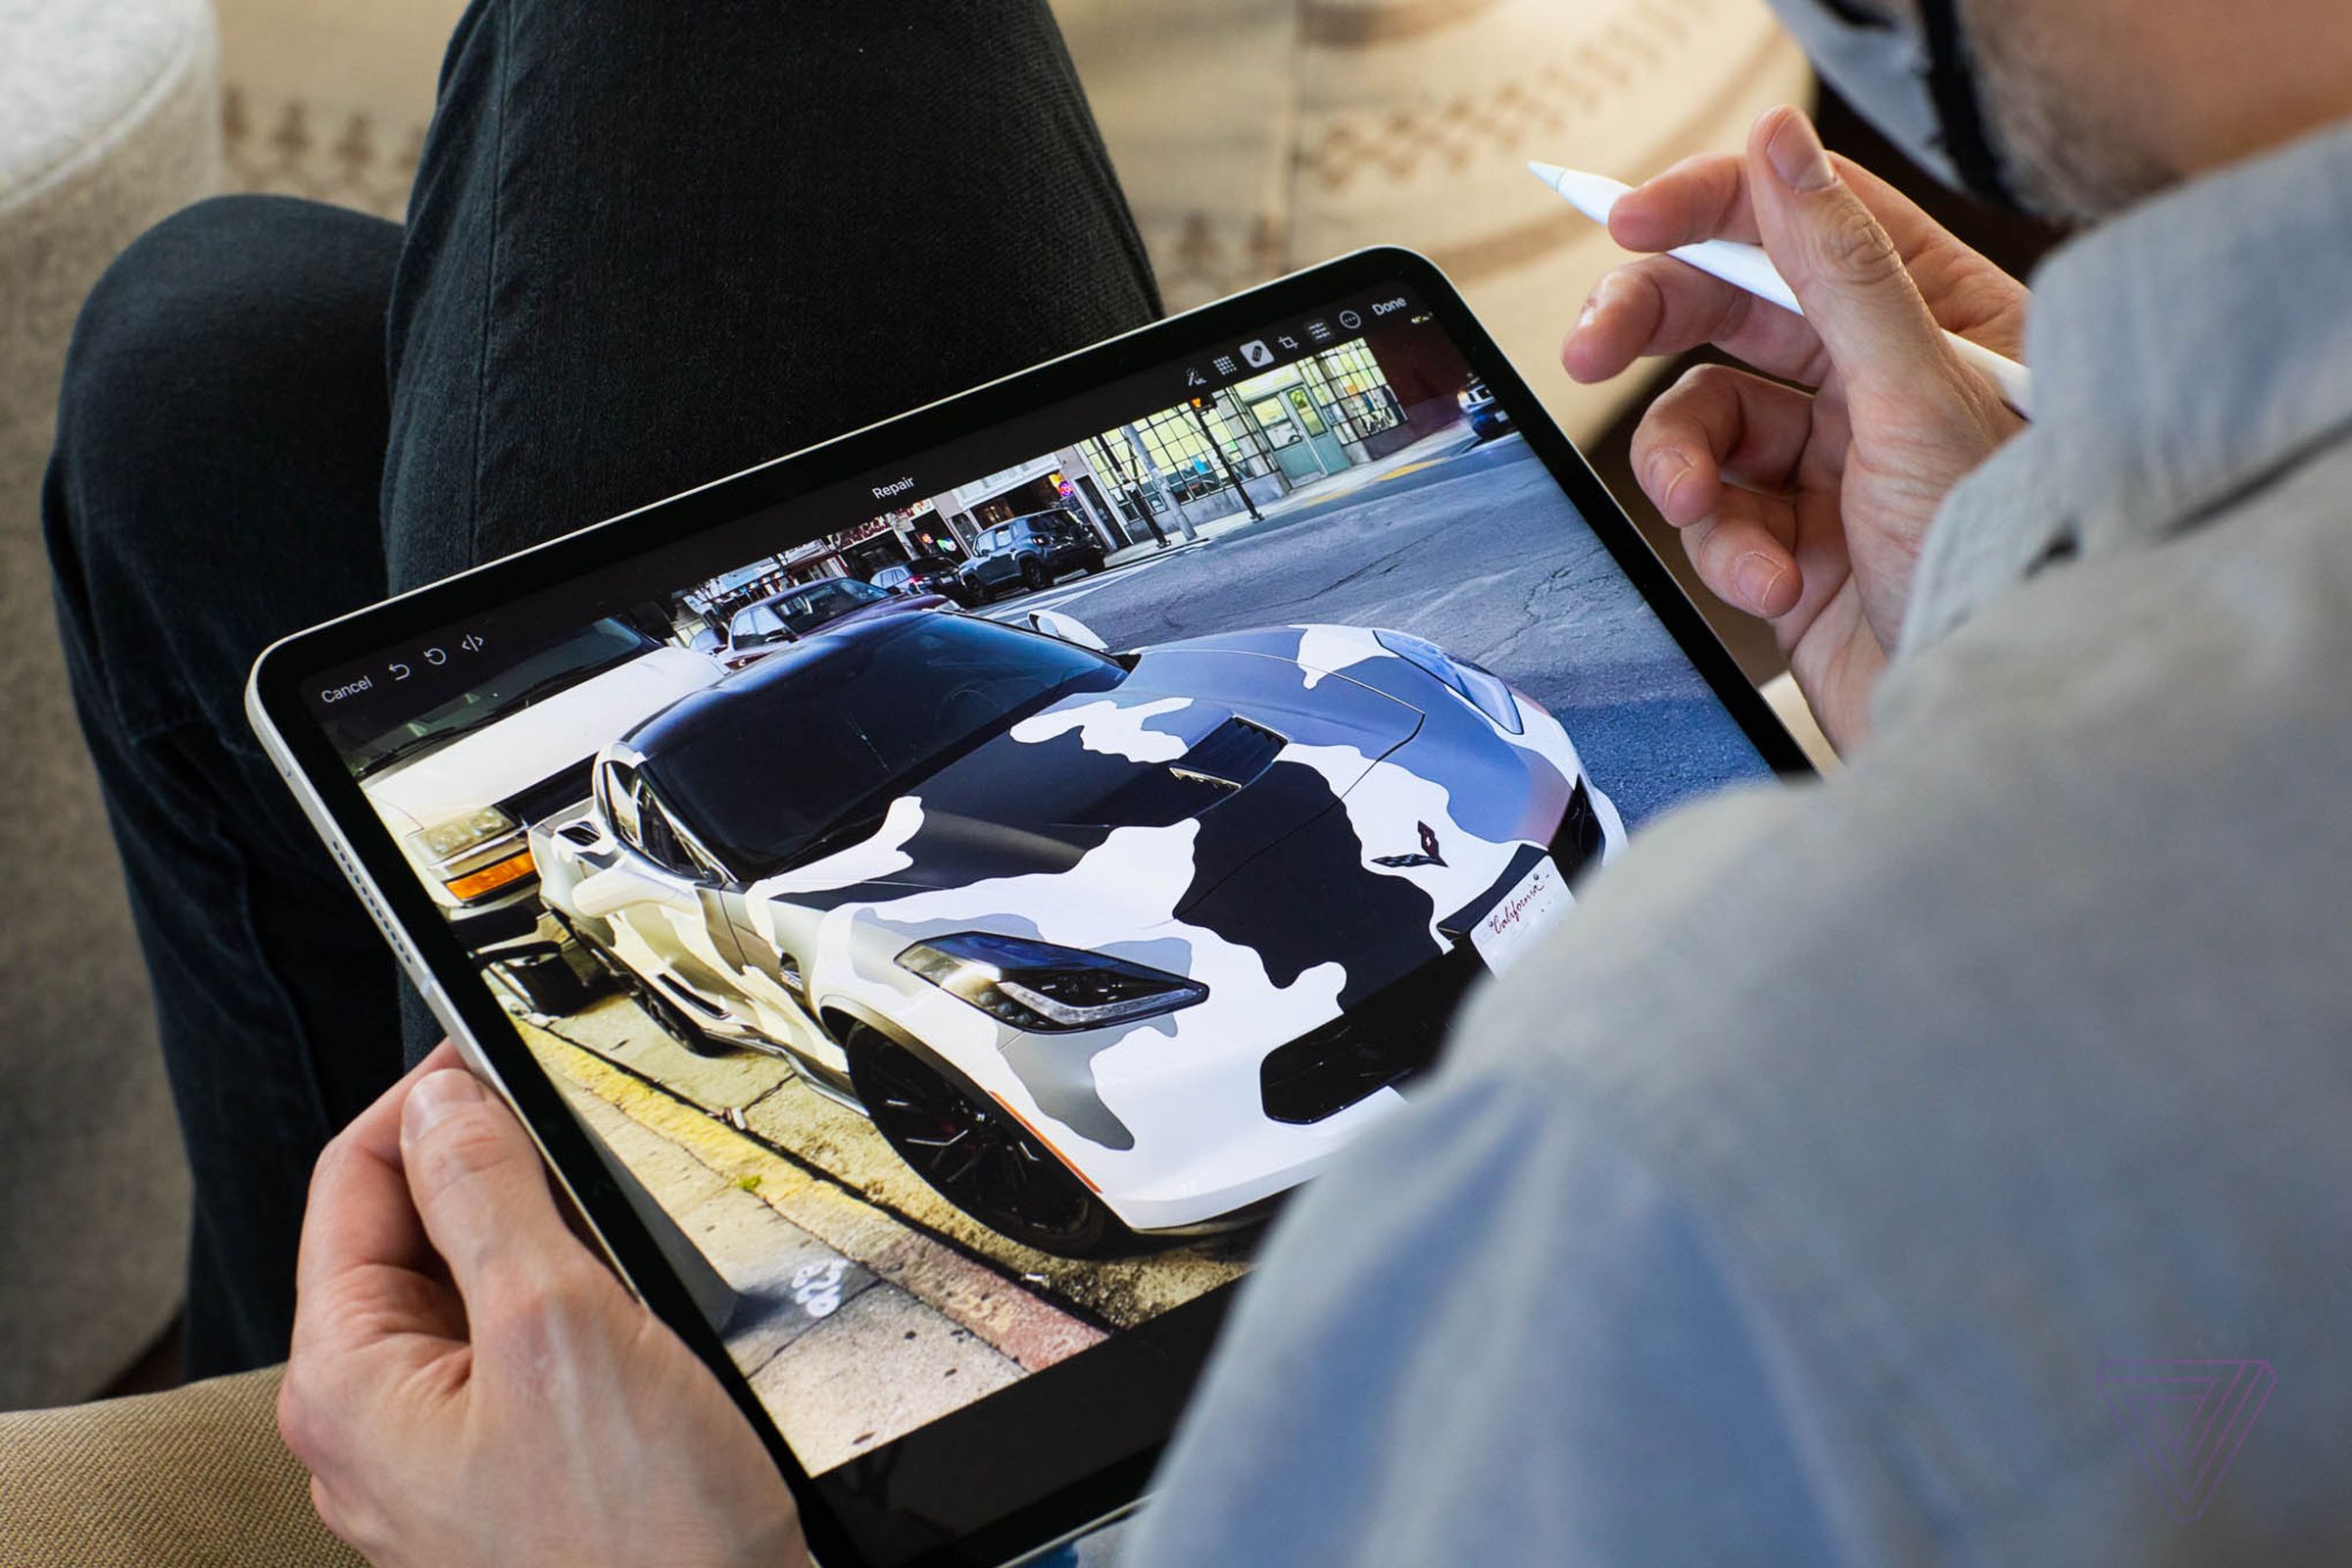 The iPad Pro on a person's lap while they use an Apple Pencil to edit a photo on the tablet.